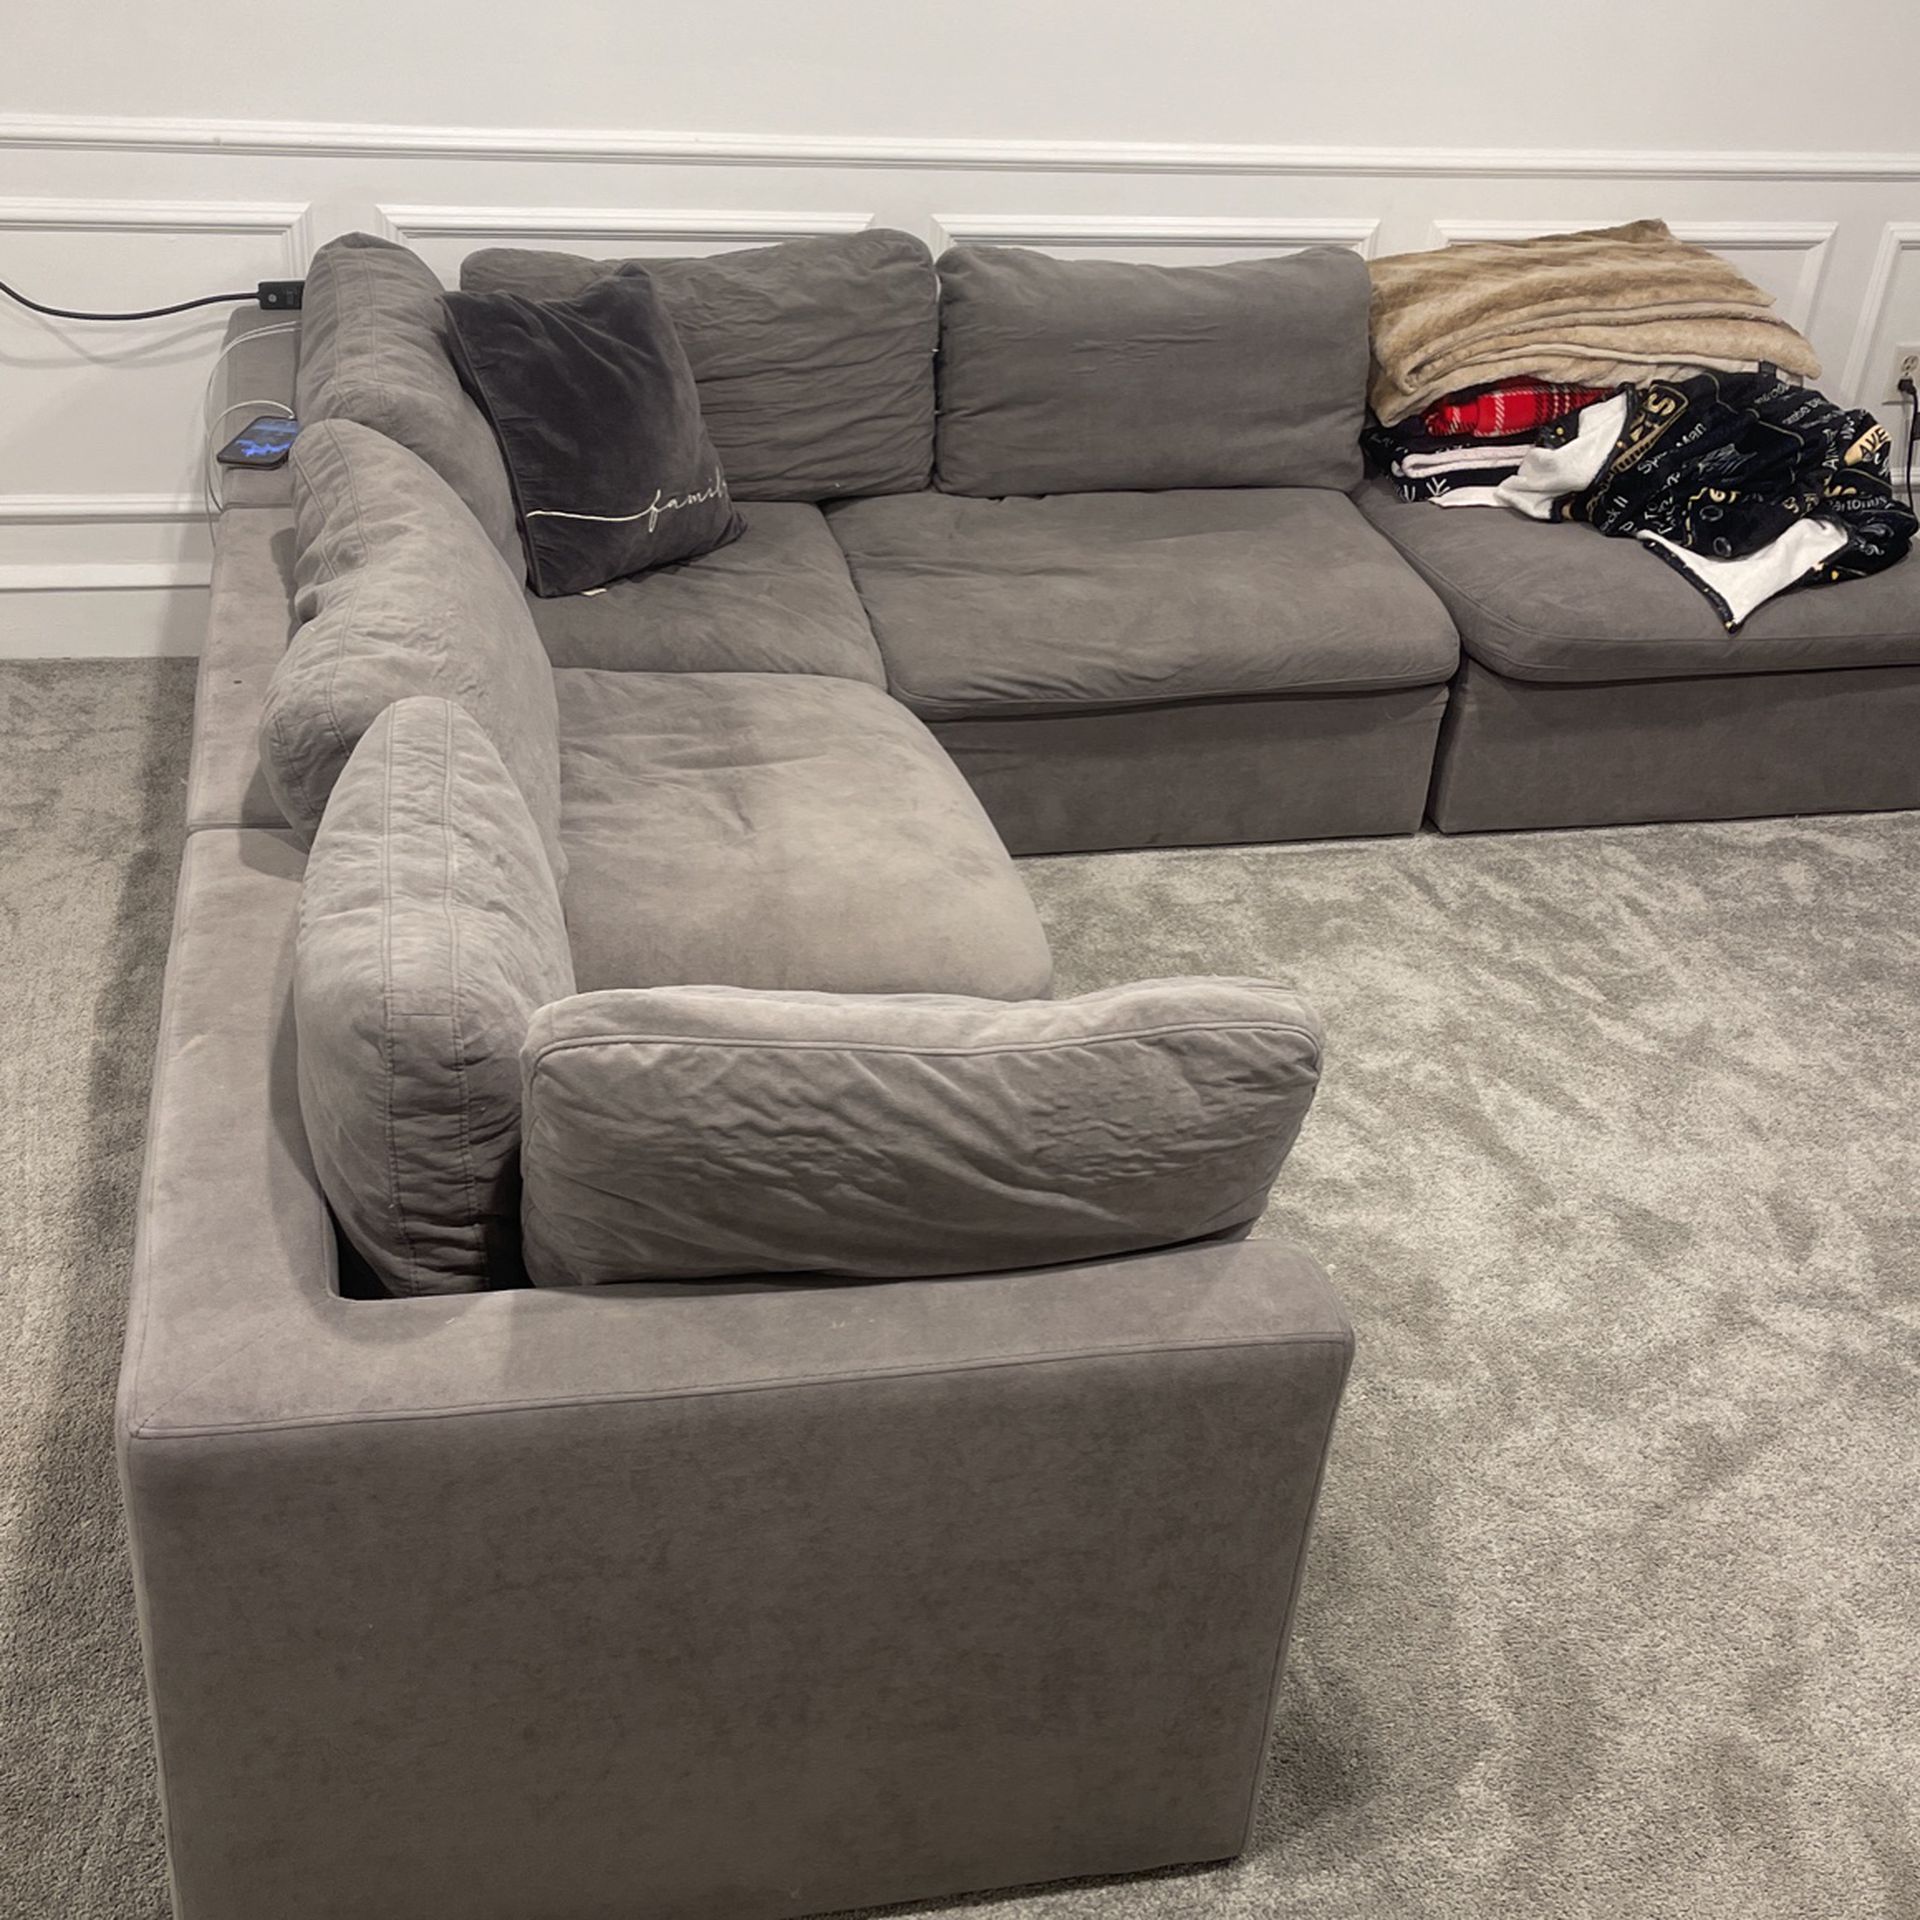 5 Piece Modular Couch (Gray)